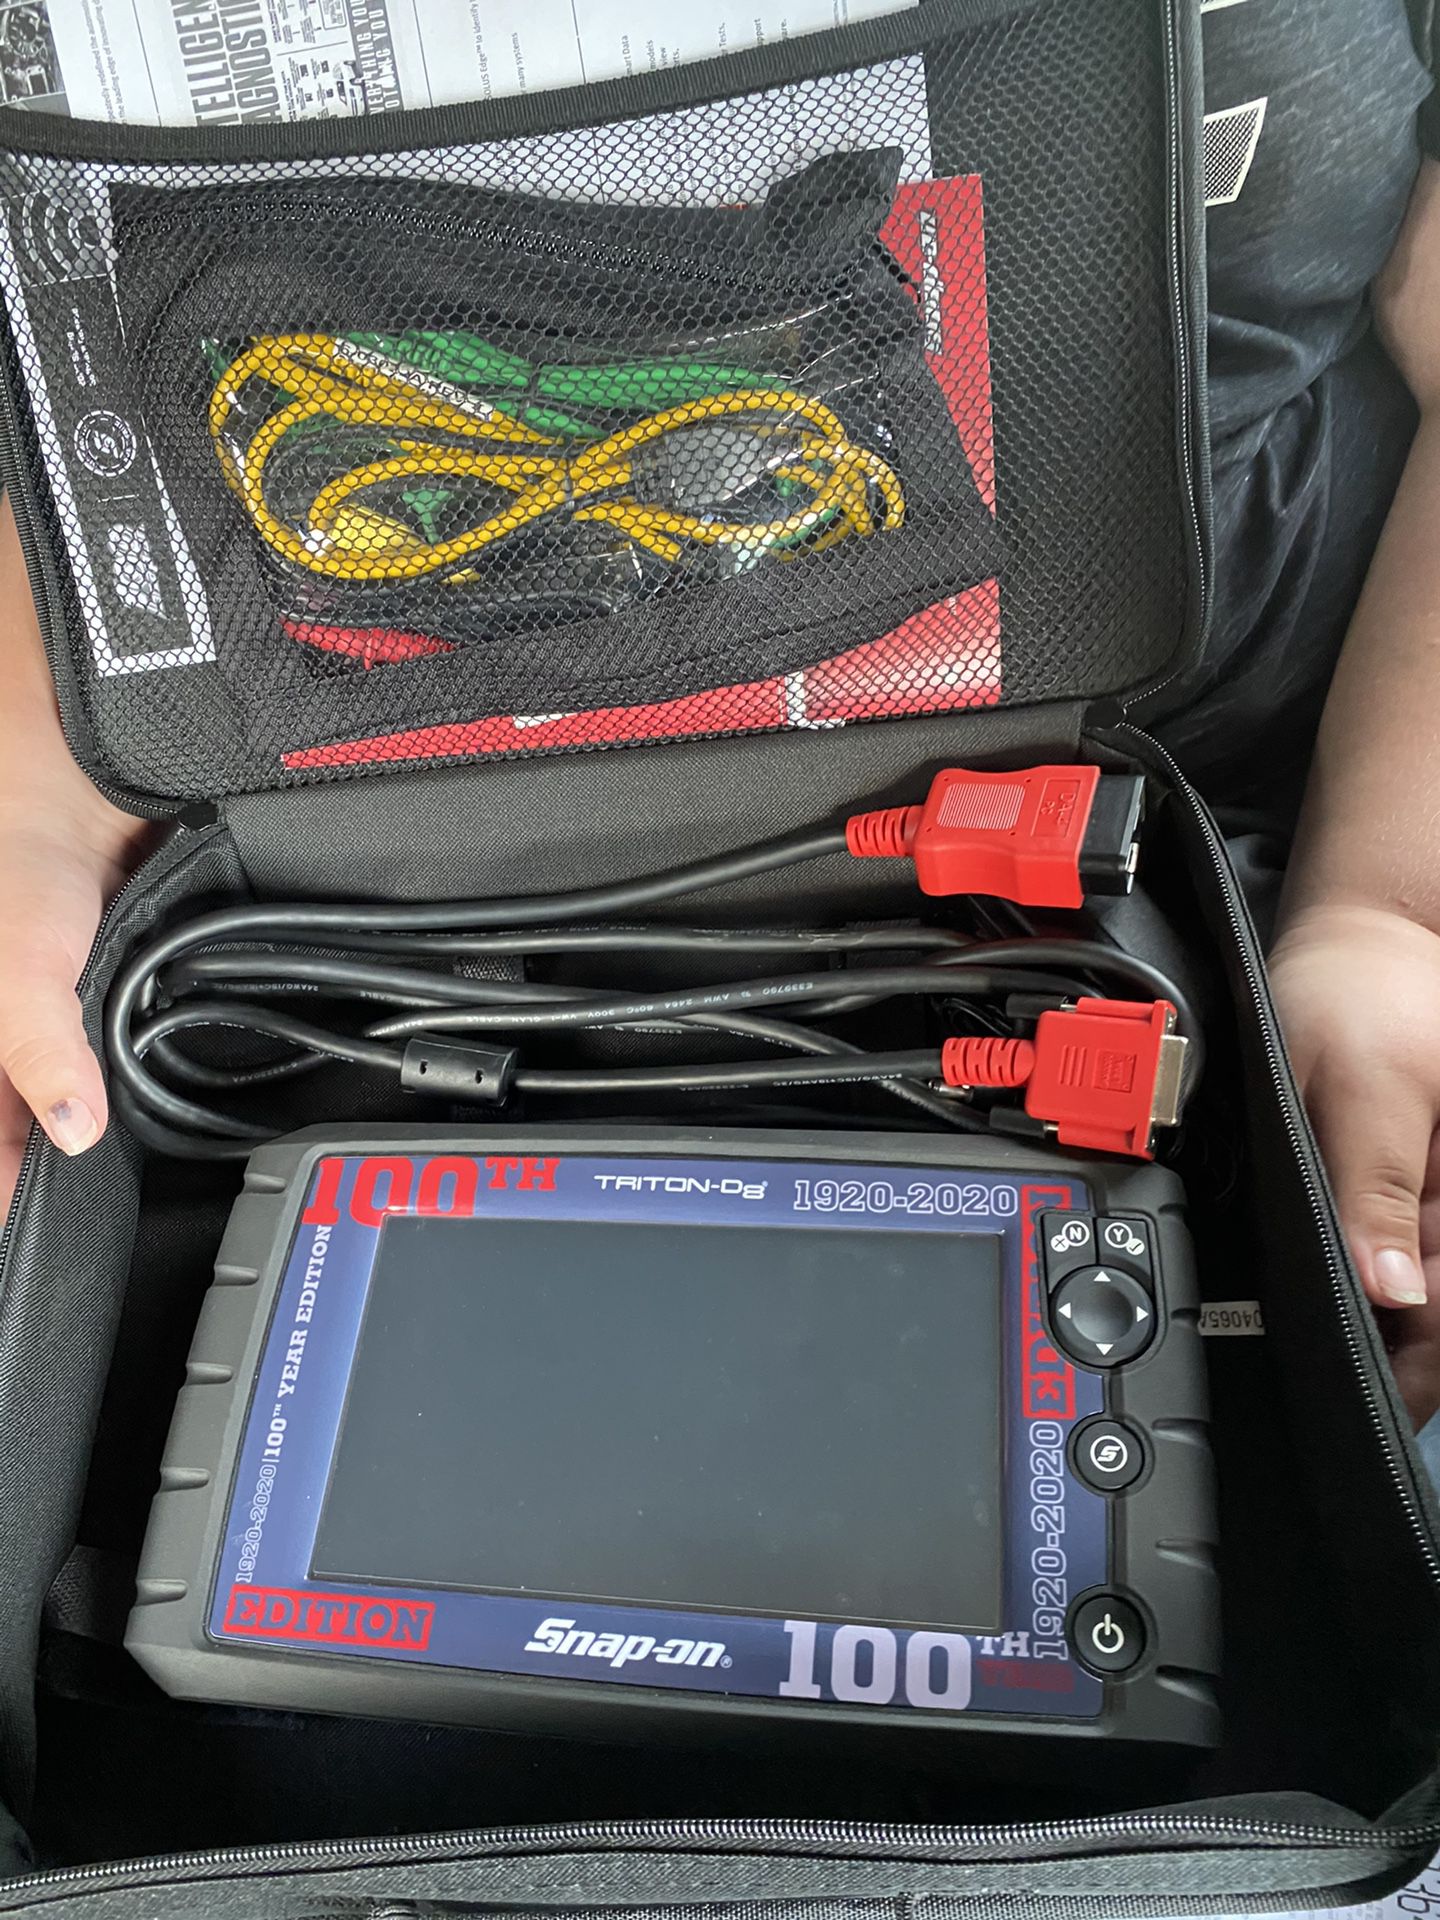 Snap on scan tool